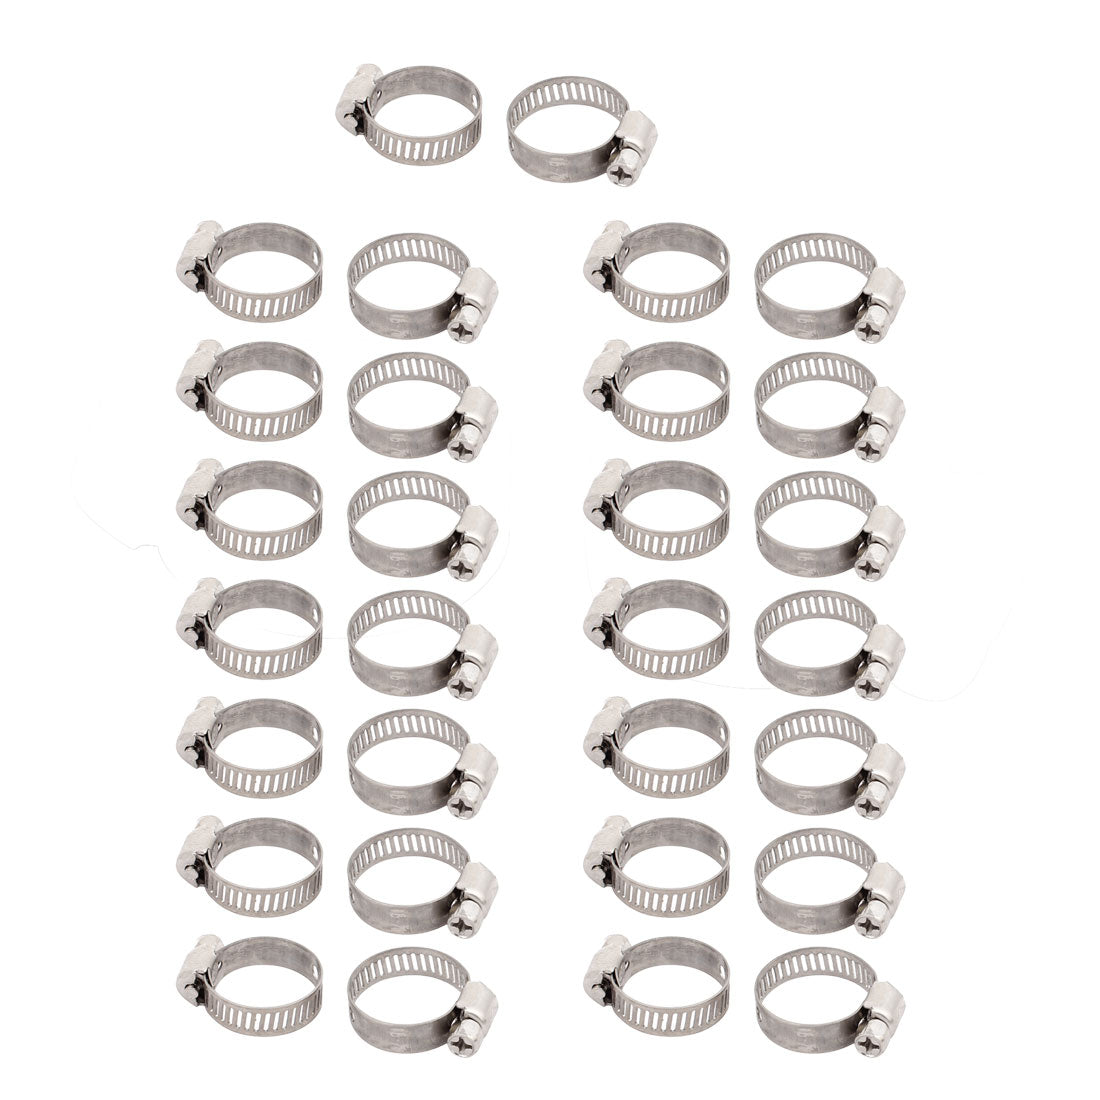 uxcell Uxcell 16mm-25mm Adjustable Range 8mm Width Stainless Steel  Gear Hose Clamp 30pcs